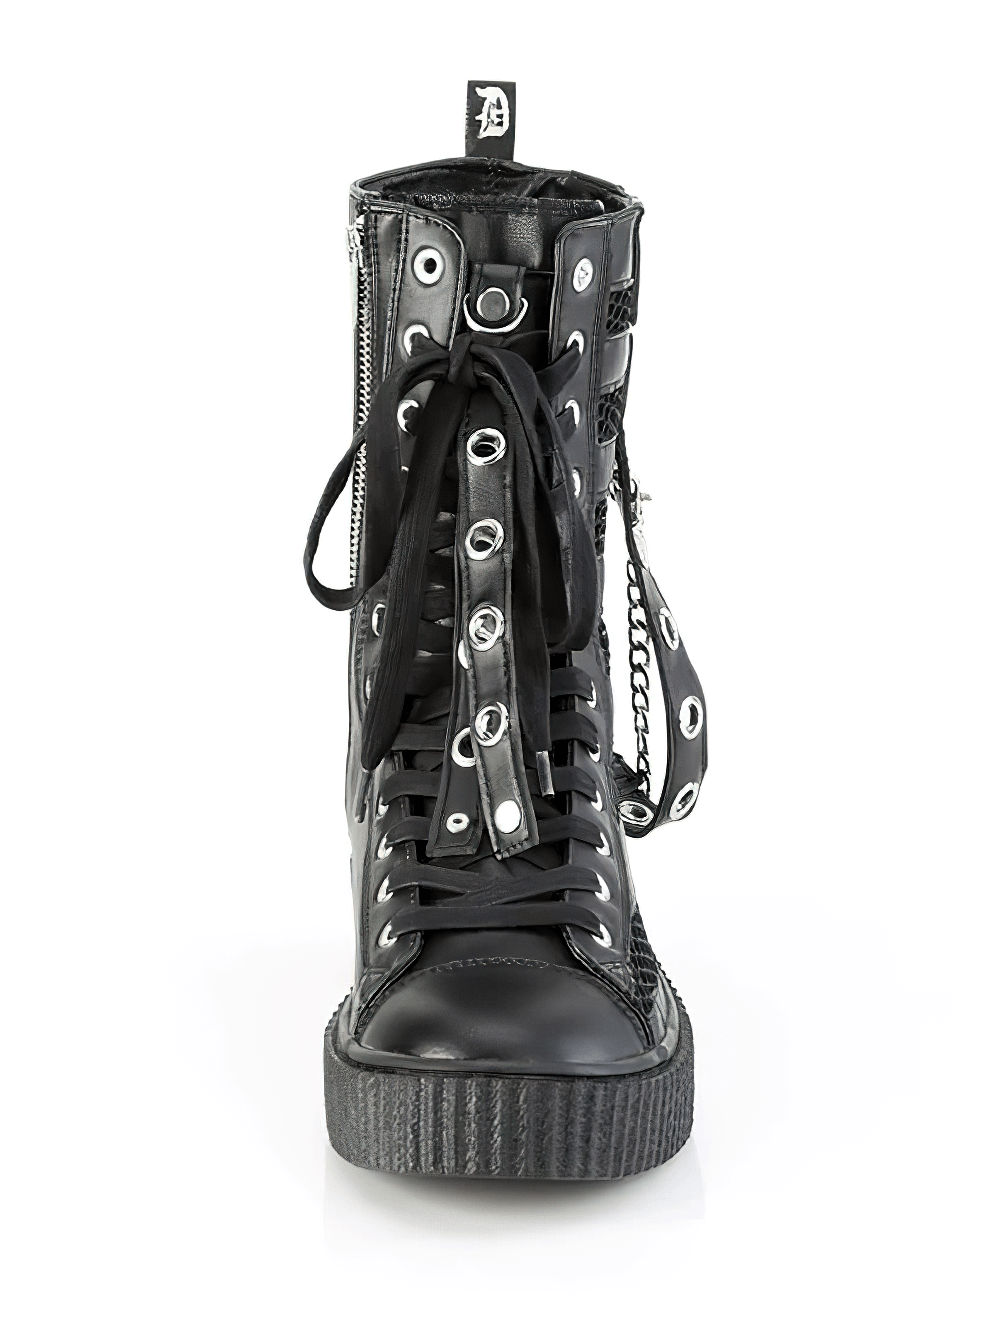 DEMONIA Gothic Mid-Calf Creeper Black Sneakers with Chains